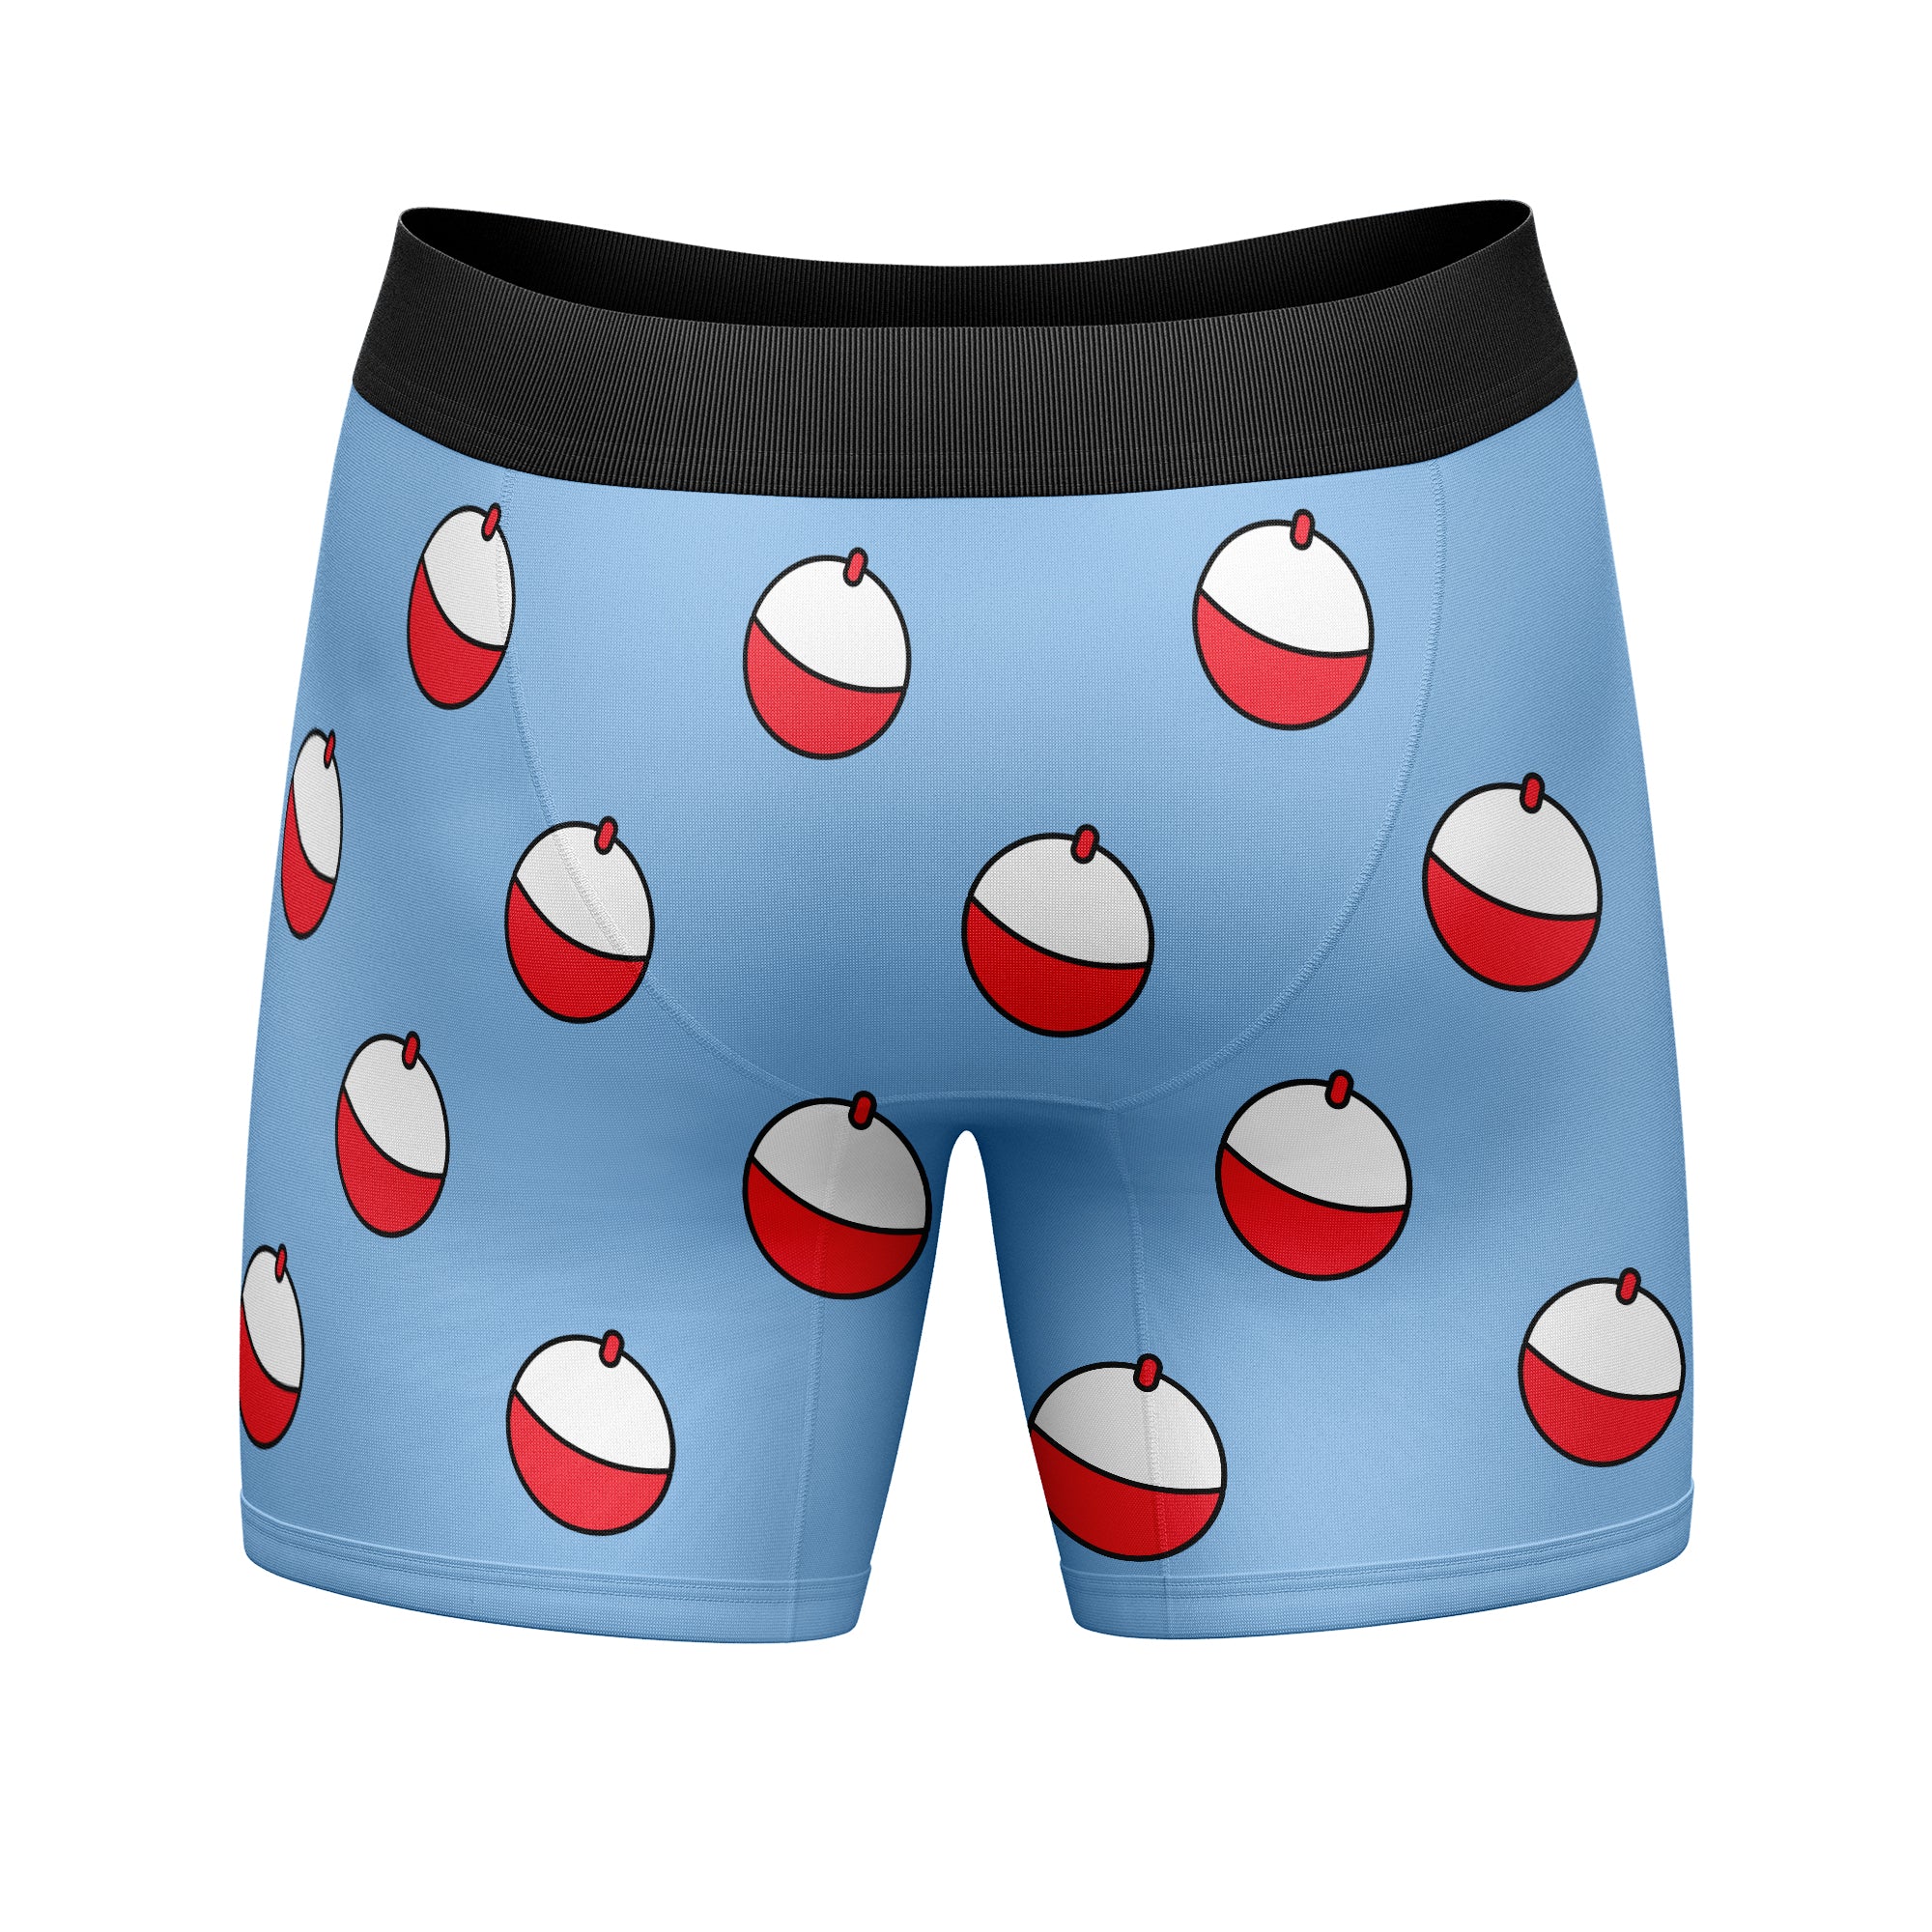 Mens Show Me Your Bobbers Boxer Briefs Funny Fishing joke Graphic